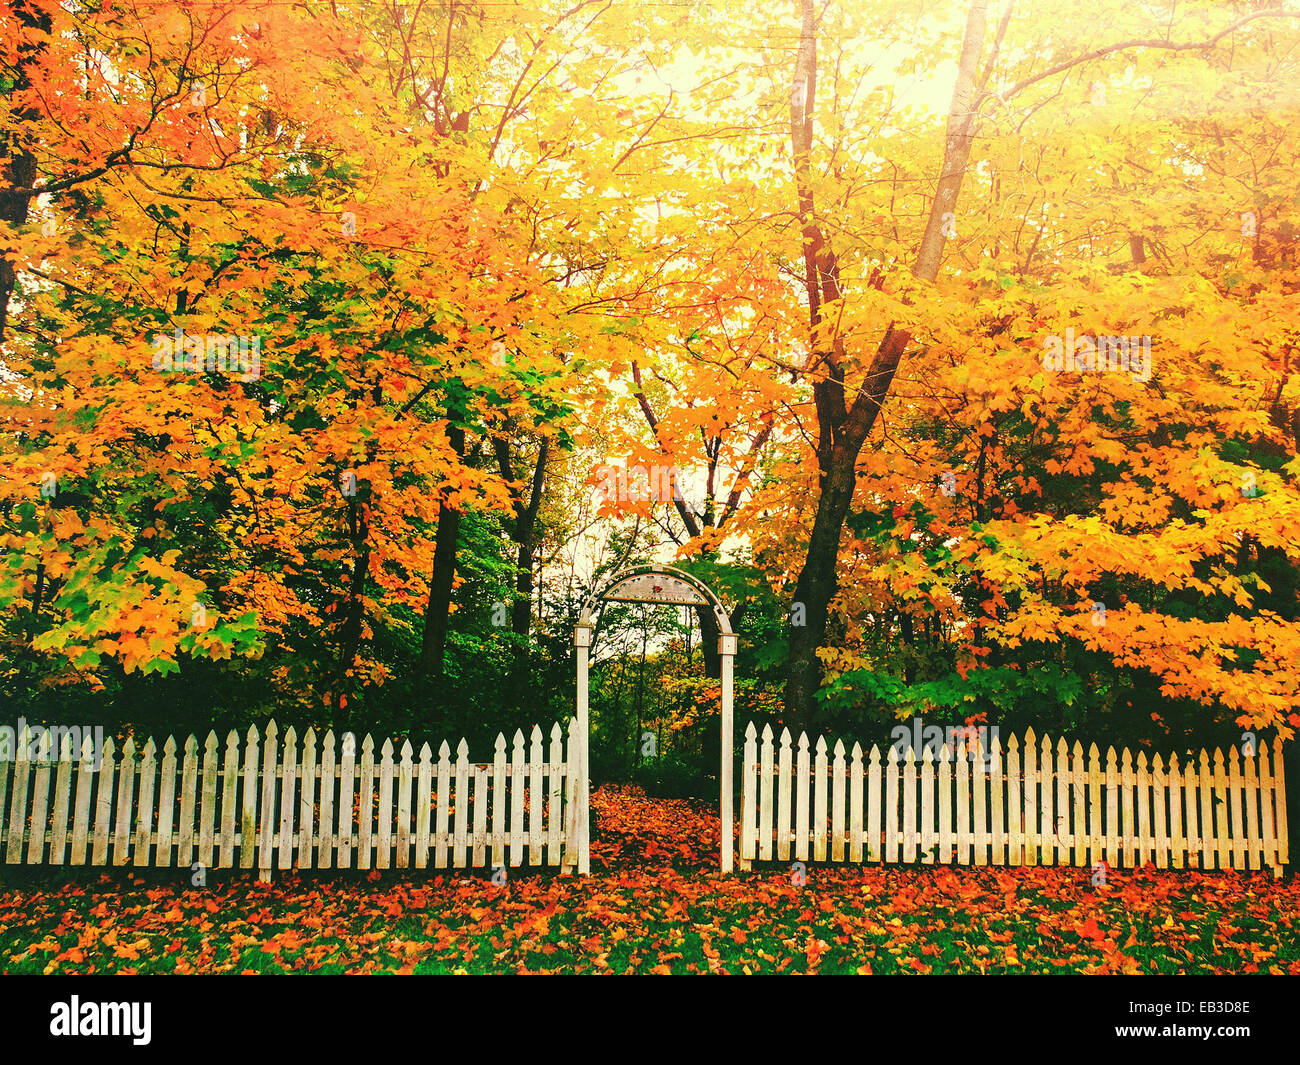 USA, Indiana, Zionsville, Boone County, White fence and yellow trees Stock Photo